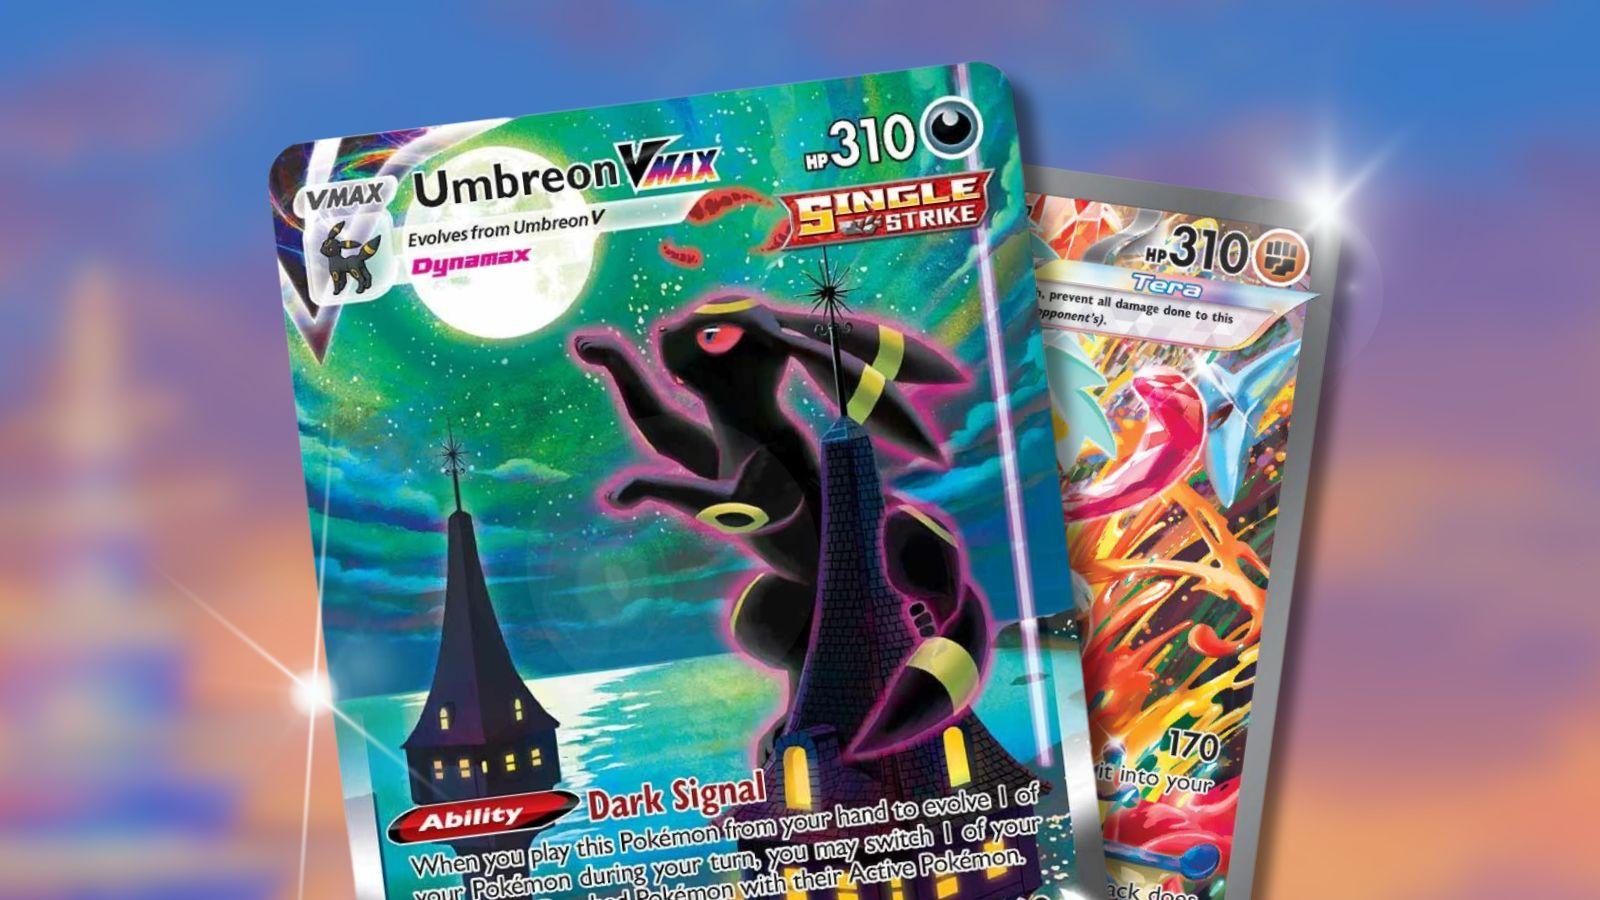 Umbreon and Greninja Pokemon cards with anime background and sparkles.